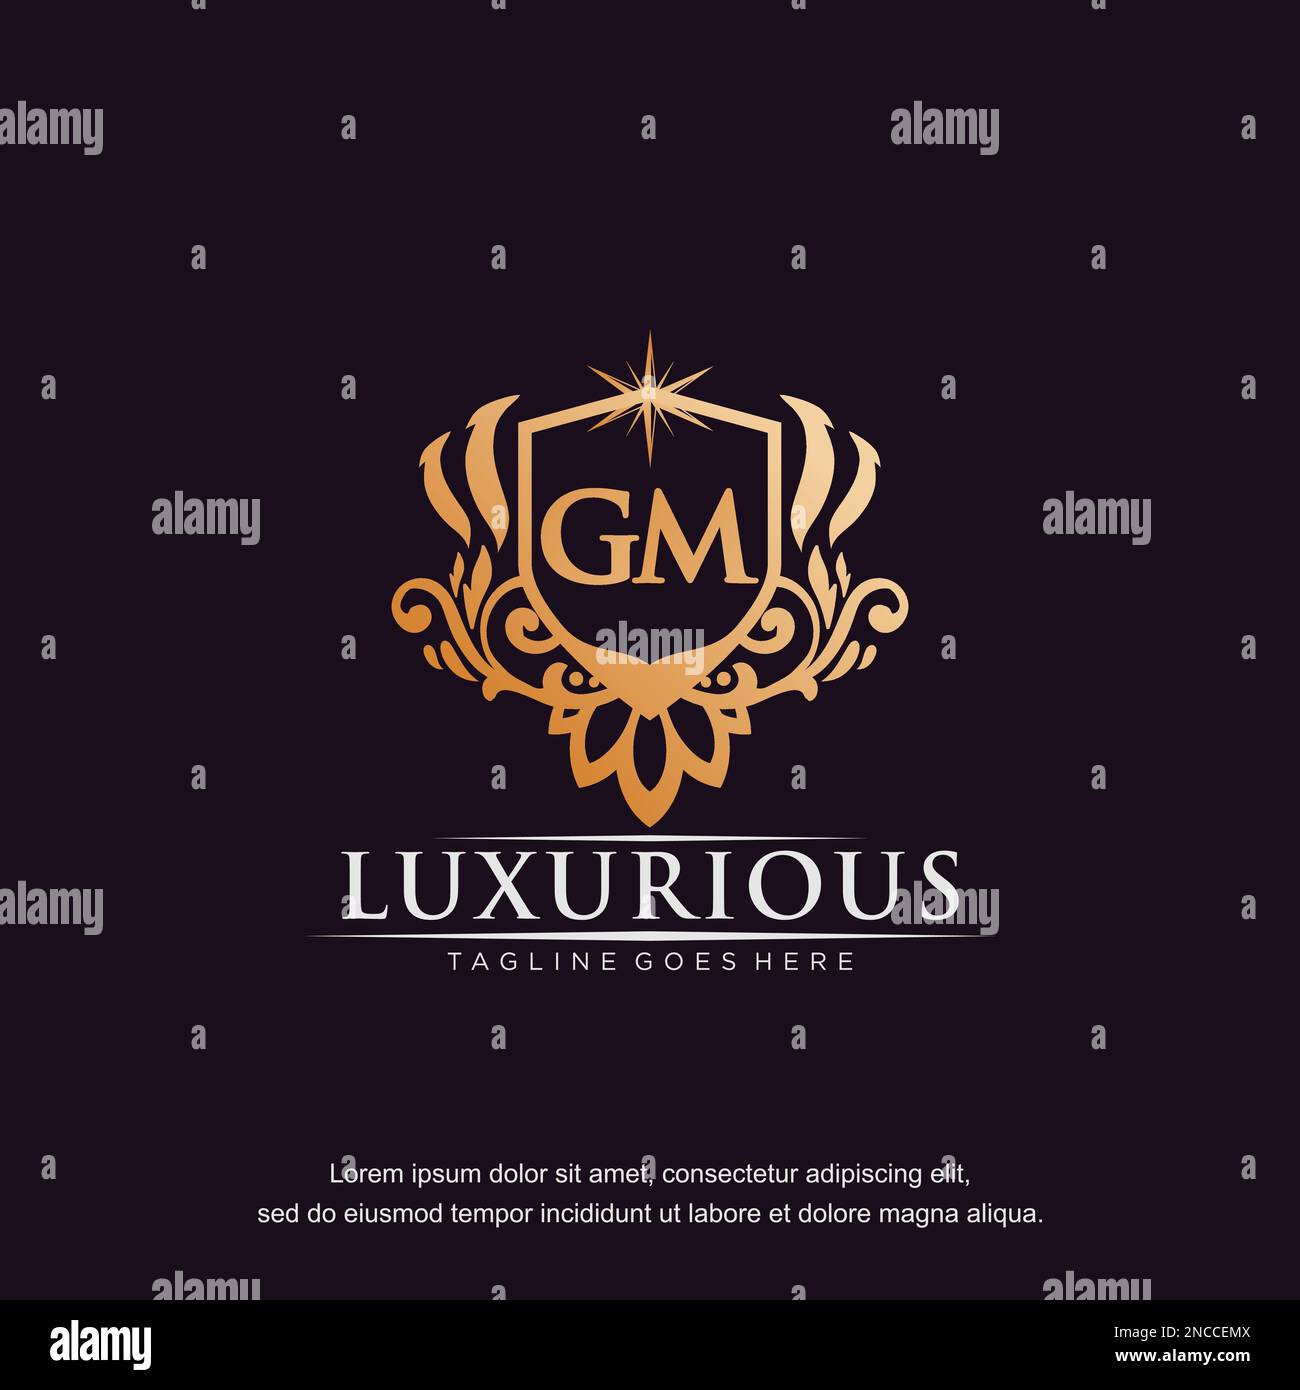 Gm monogram logo with crown shape luxury style Vector Image